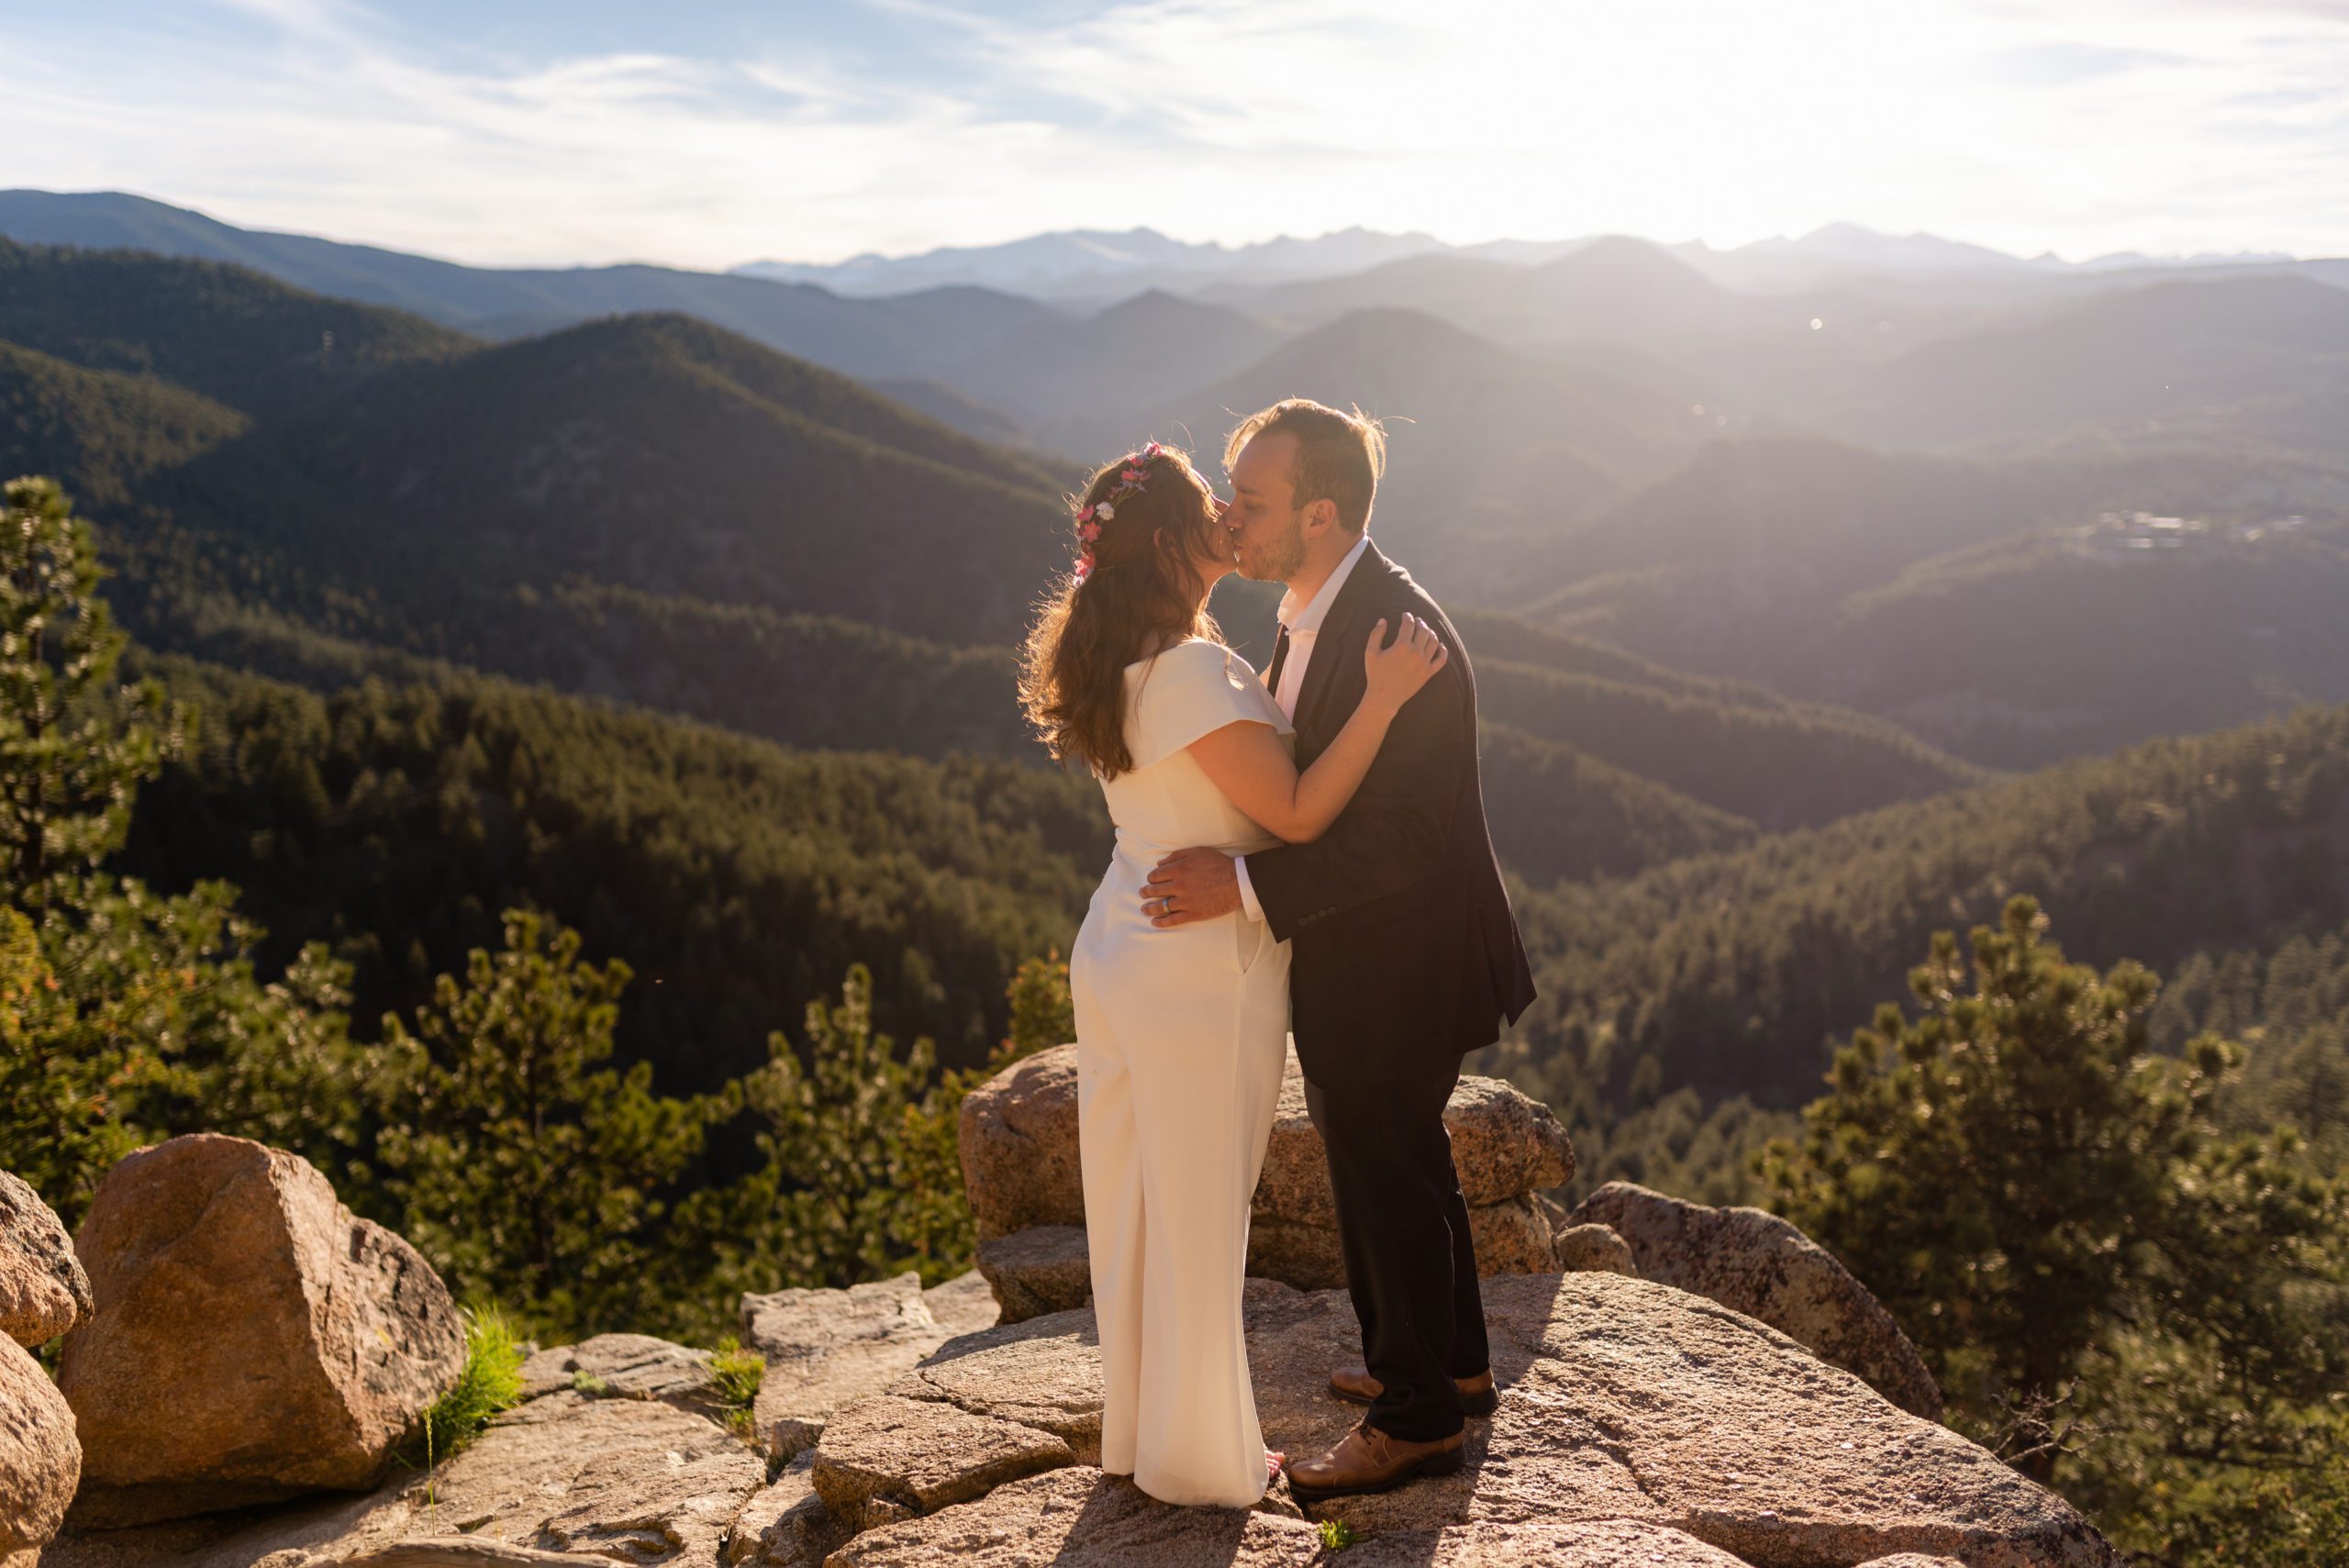 The bride and groom kiss sweetly at the top of the overlook during their Boulder hiking elopement near realization point.